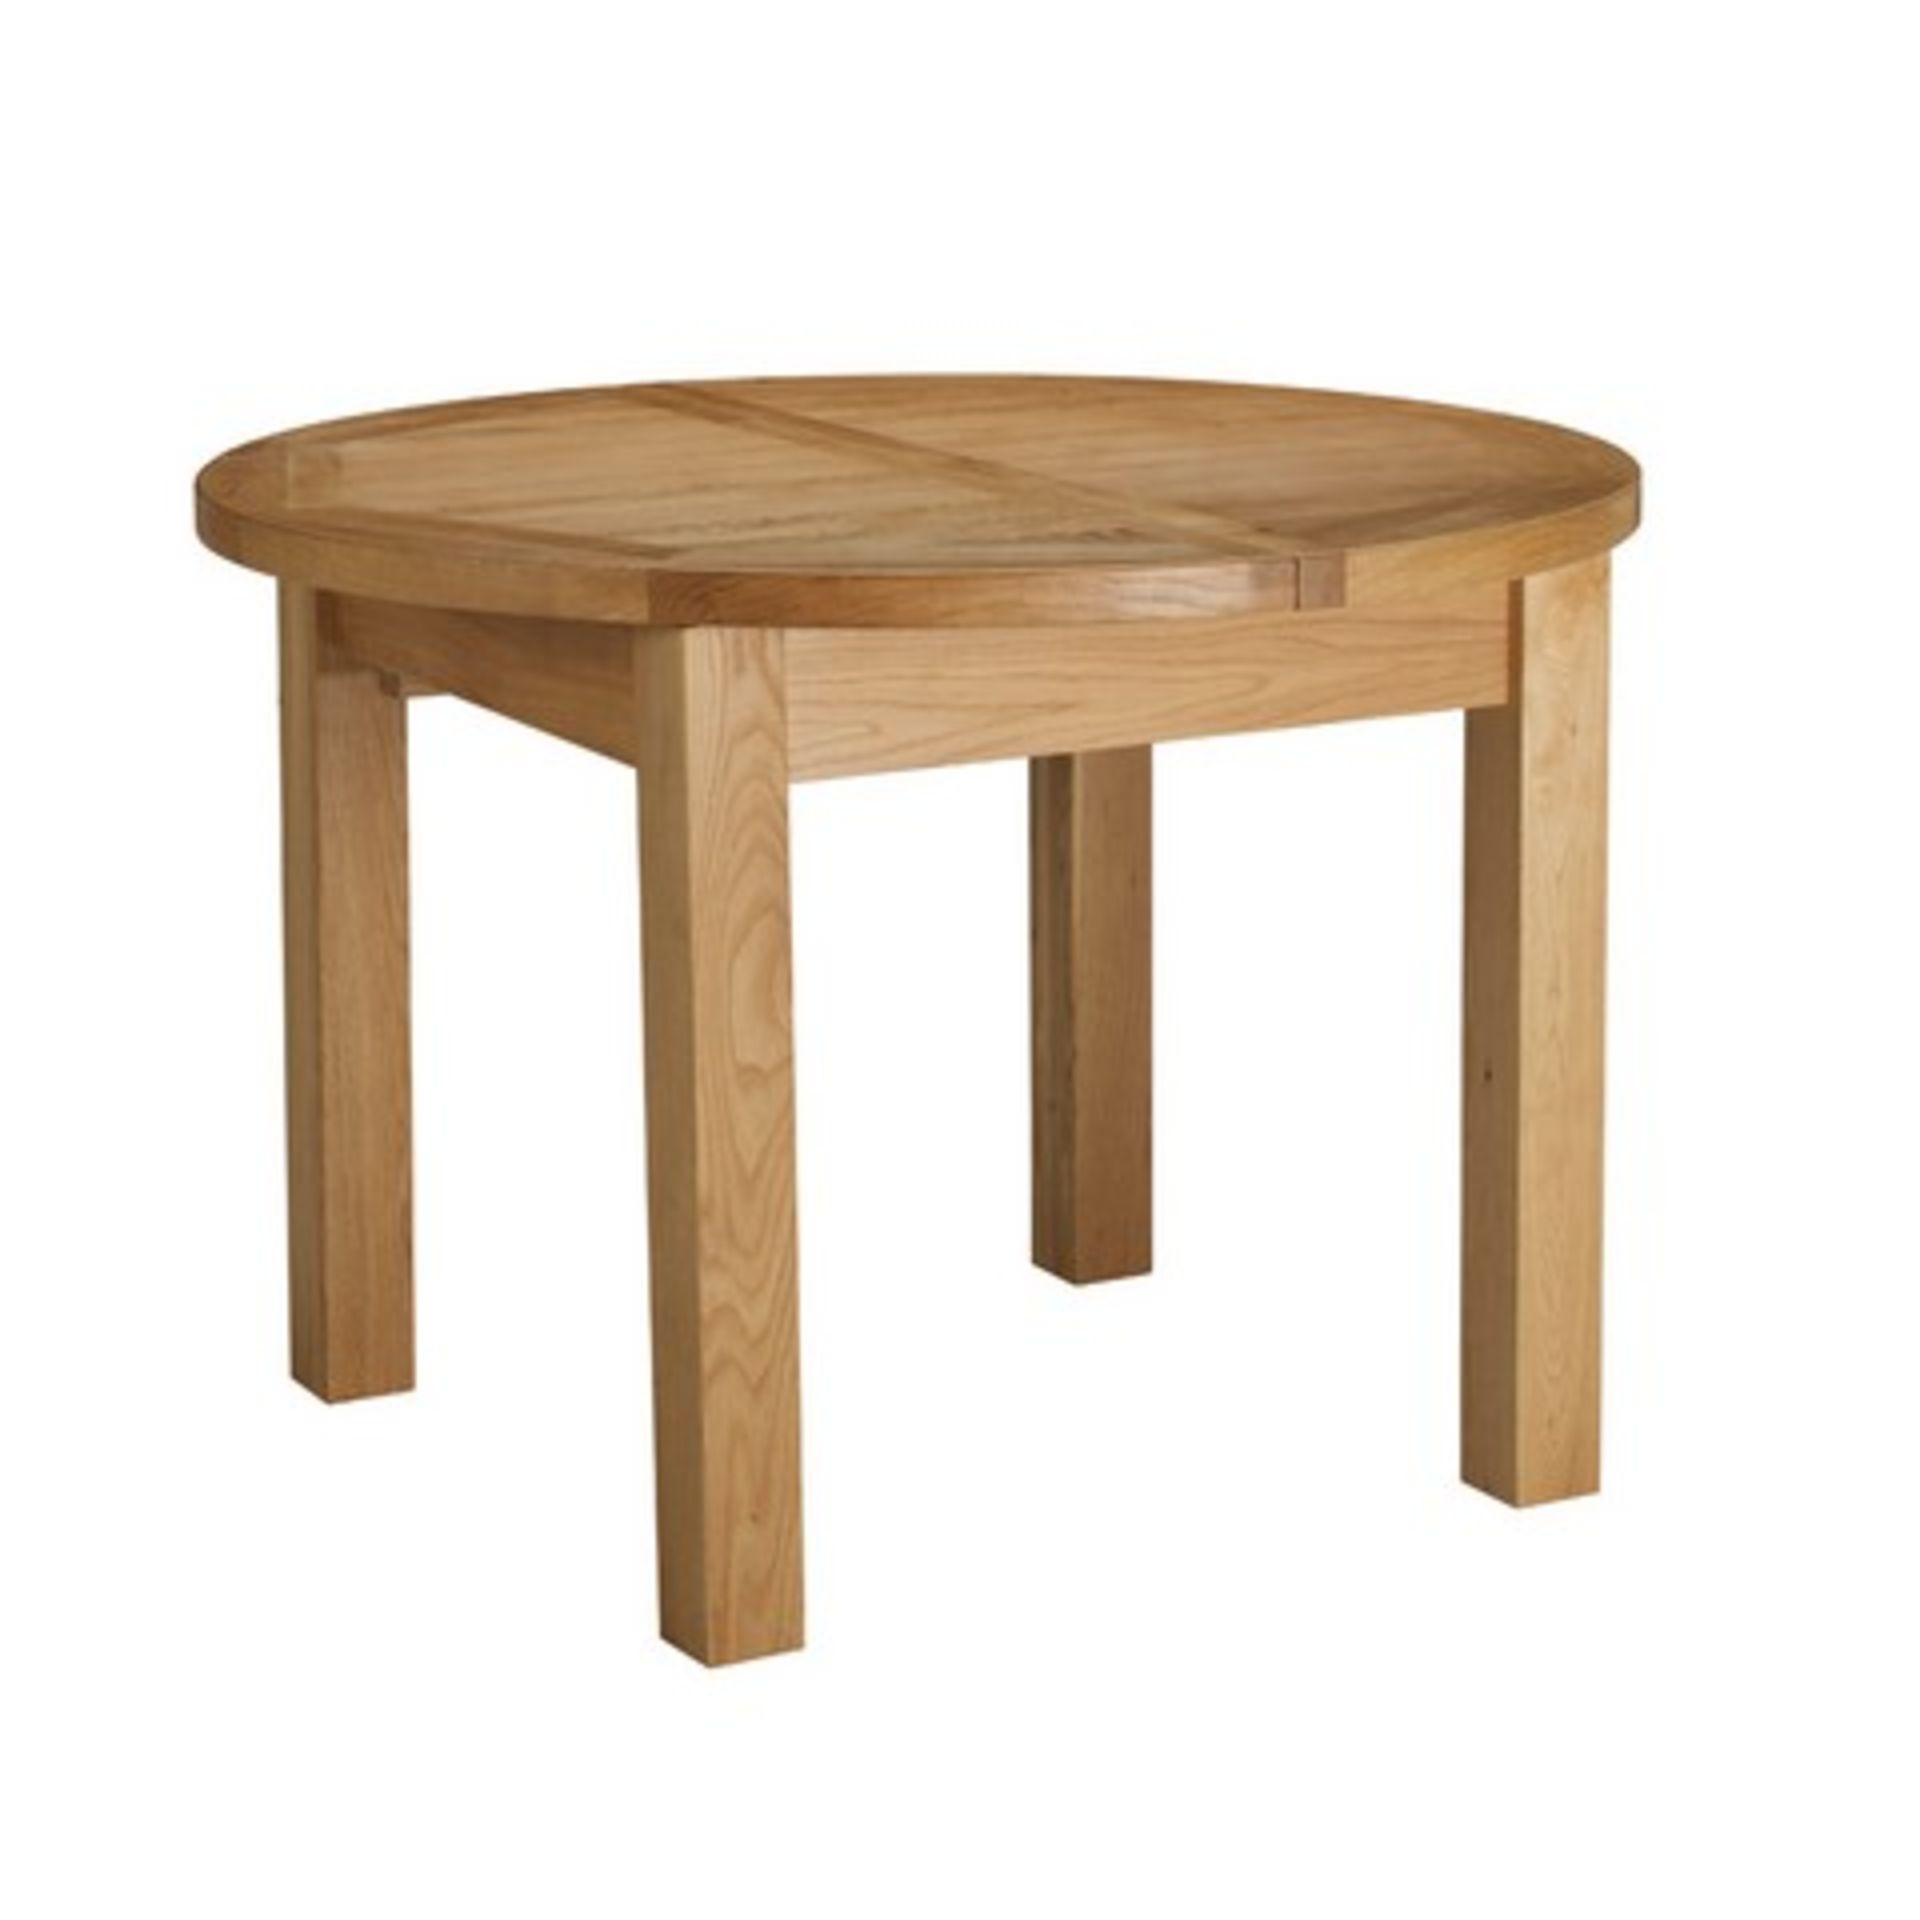 + VAT Brand New Chiswick Oak 120 x 80 Butterfly Extension Table 120/166w x 80d x 77h cms ISP £405. - Image 2 of 2